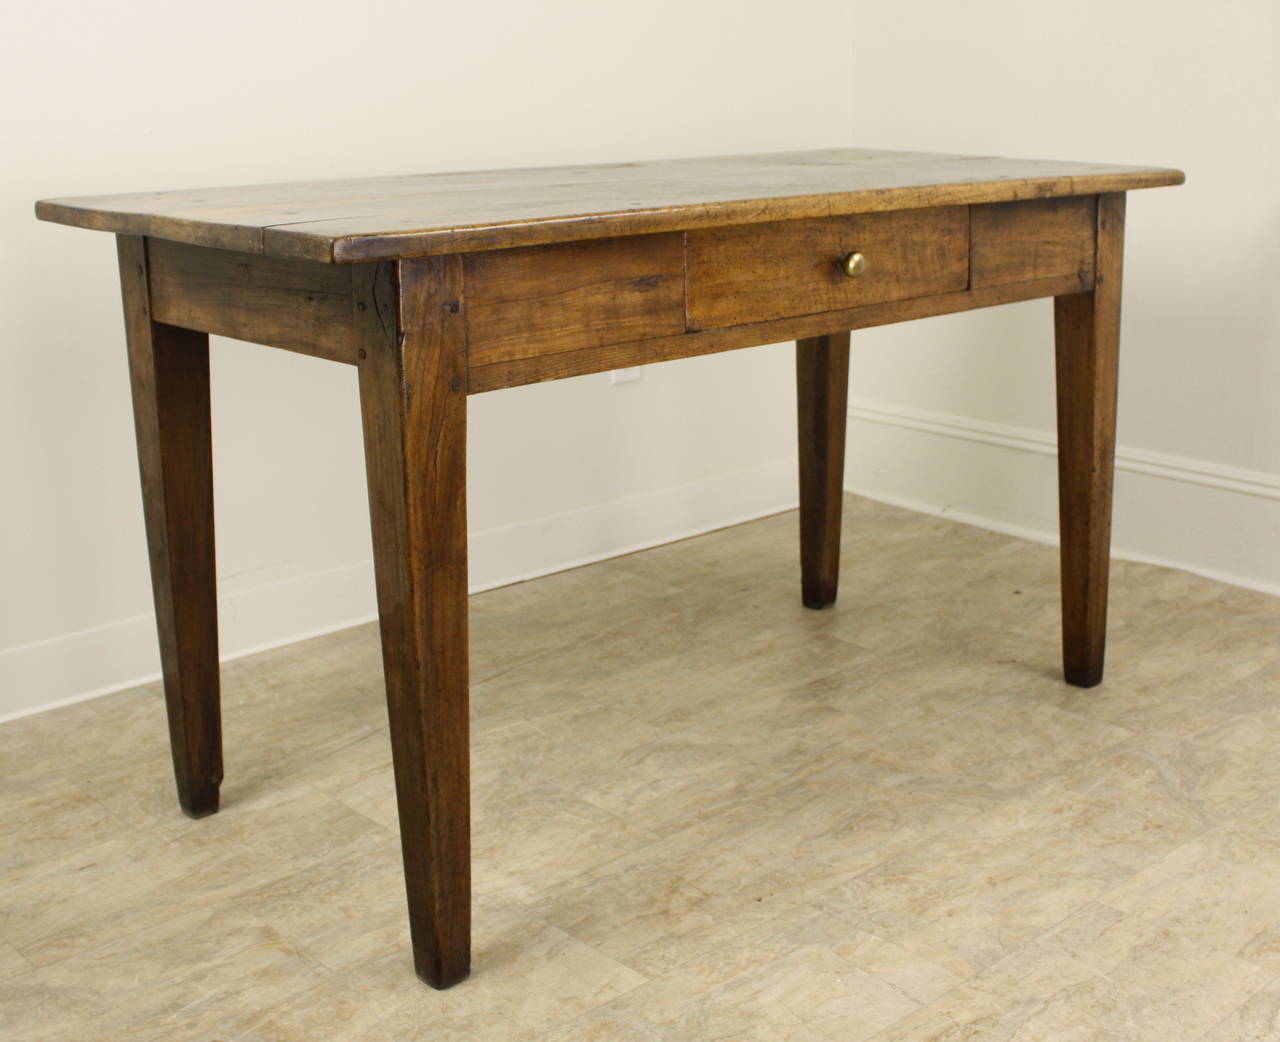 A generously proportioned writing table or desk with lovely grain in well patinated walnut. The top shows interesting distress appropriate for the age of the piece. One drawer accented with pretty brass knob. The 24